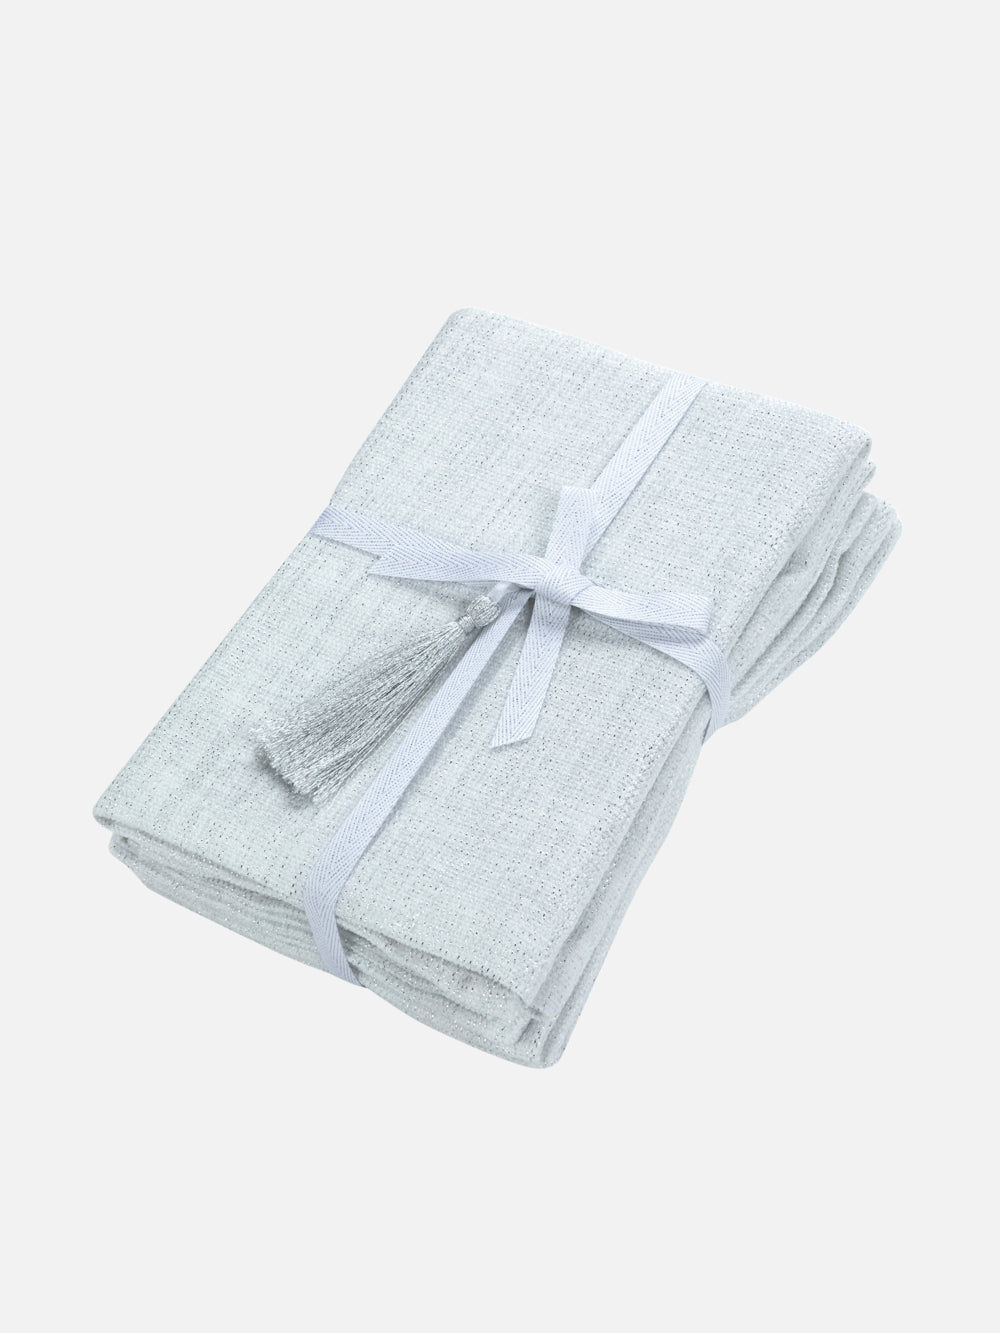 Pearl Polyester Napkins, Set of 4